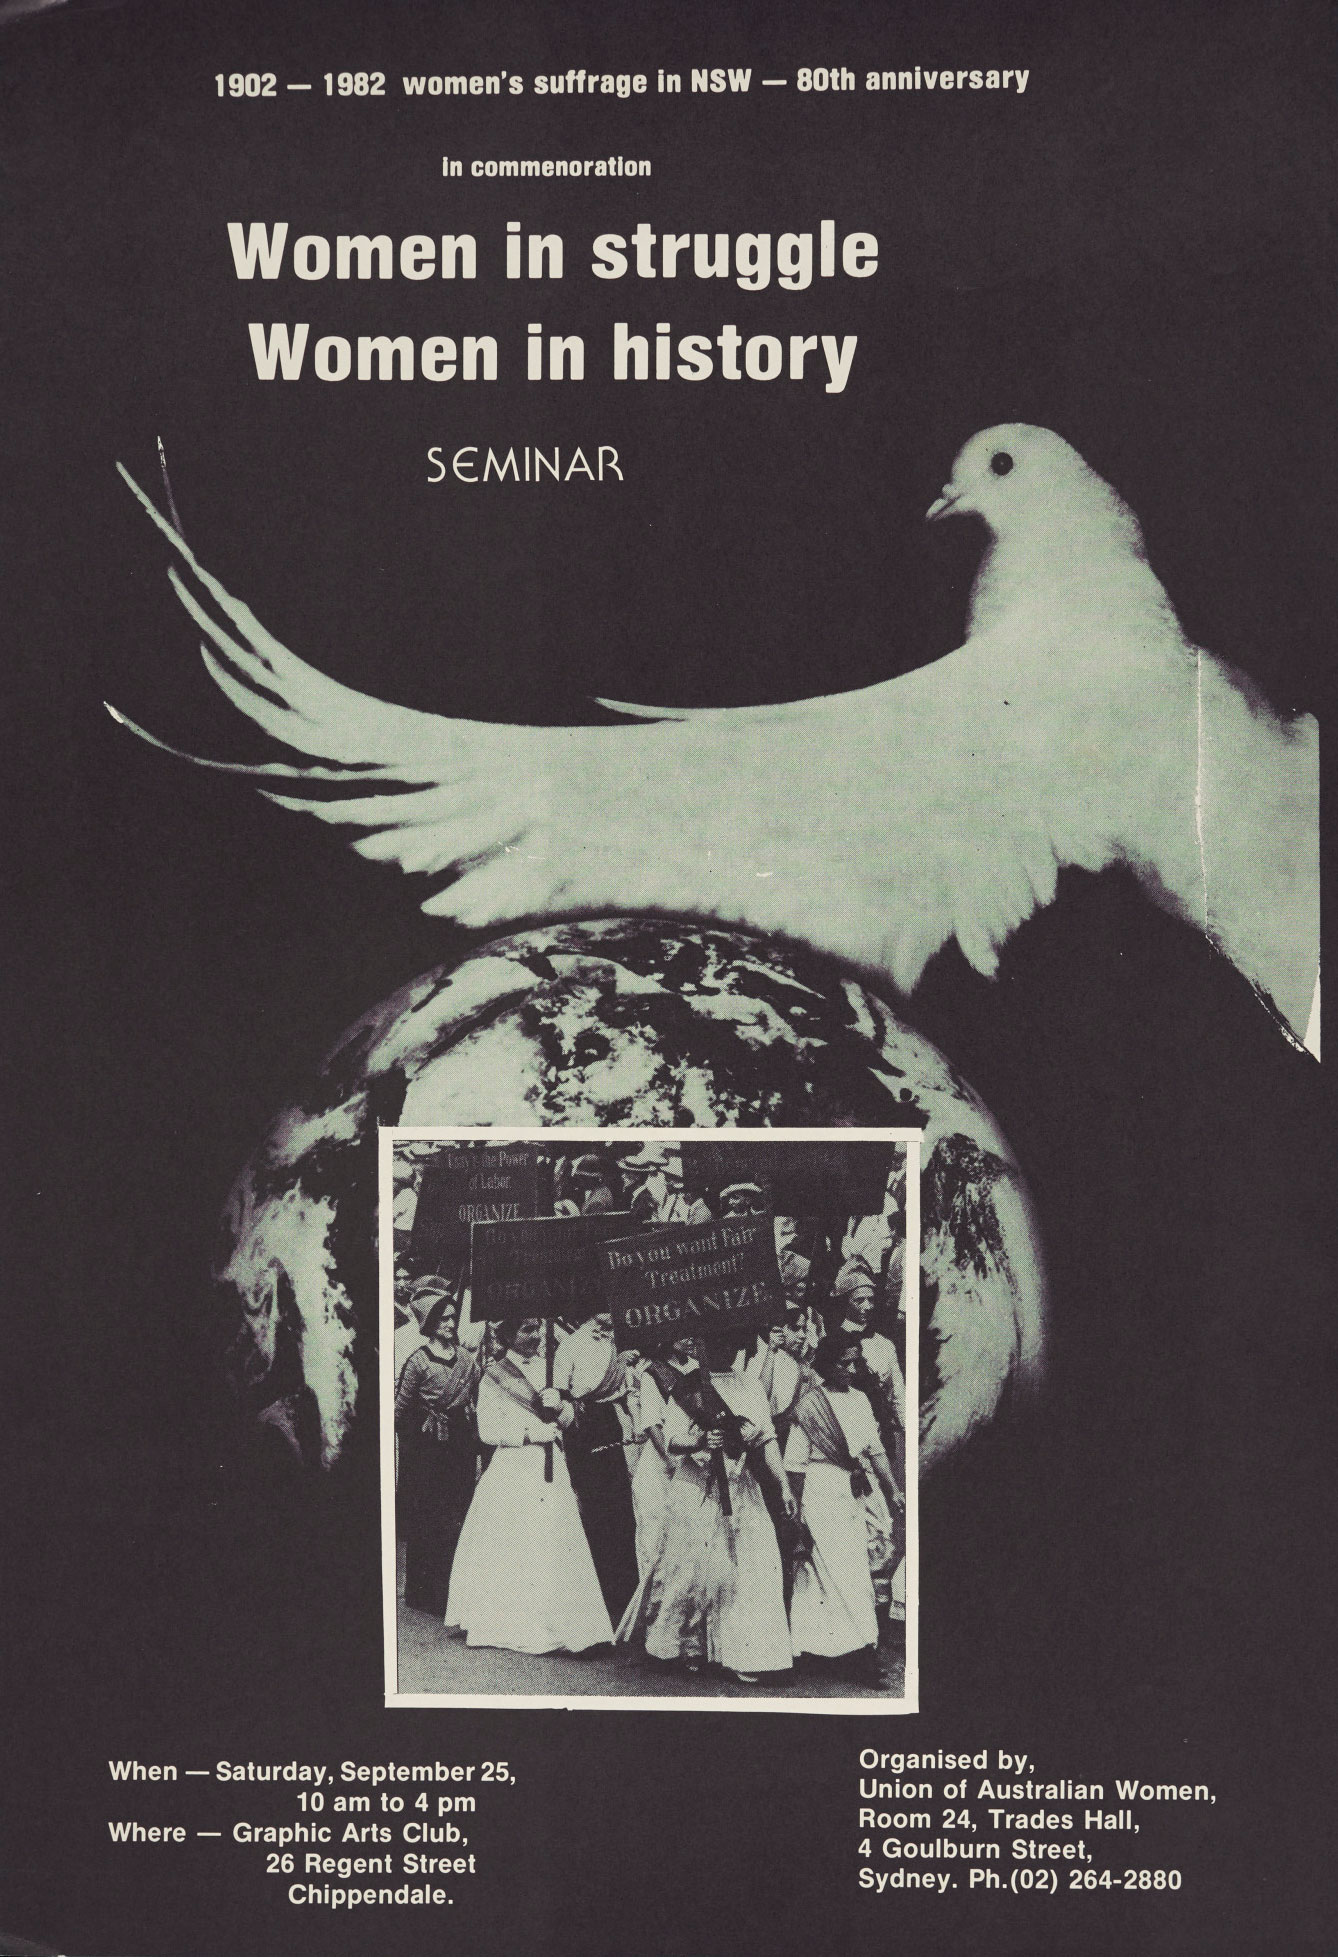 Poster celebrating the 80th anniversary of women’s suffrage in New South Wales, 1982.